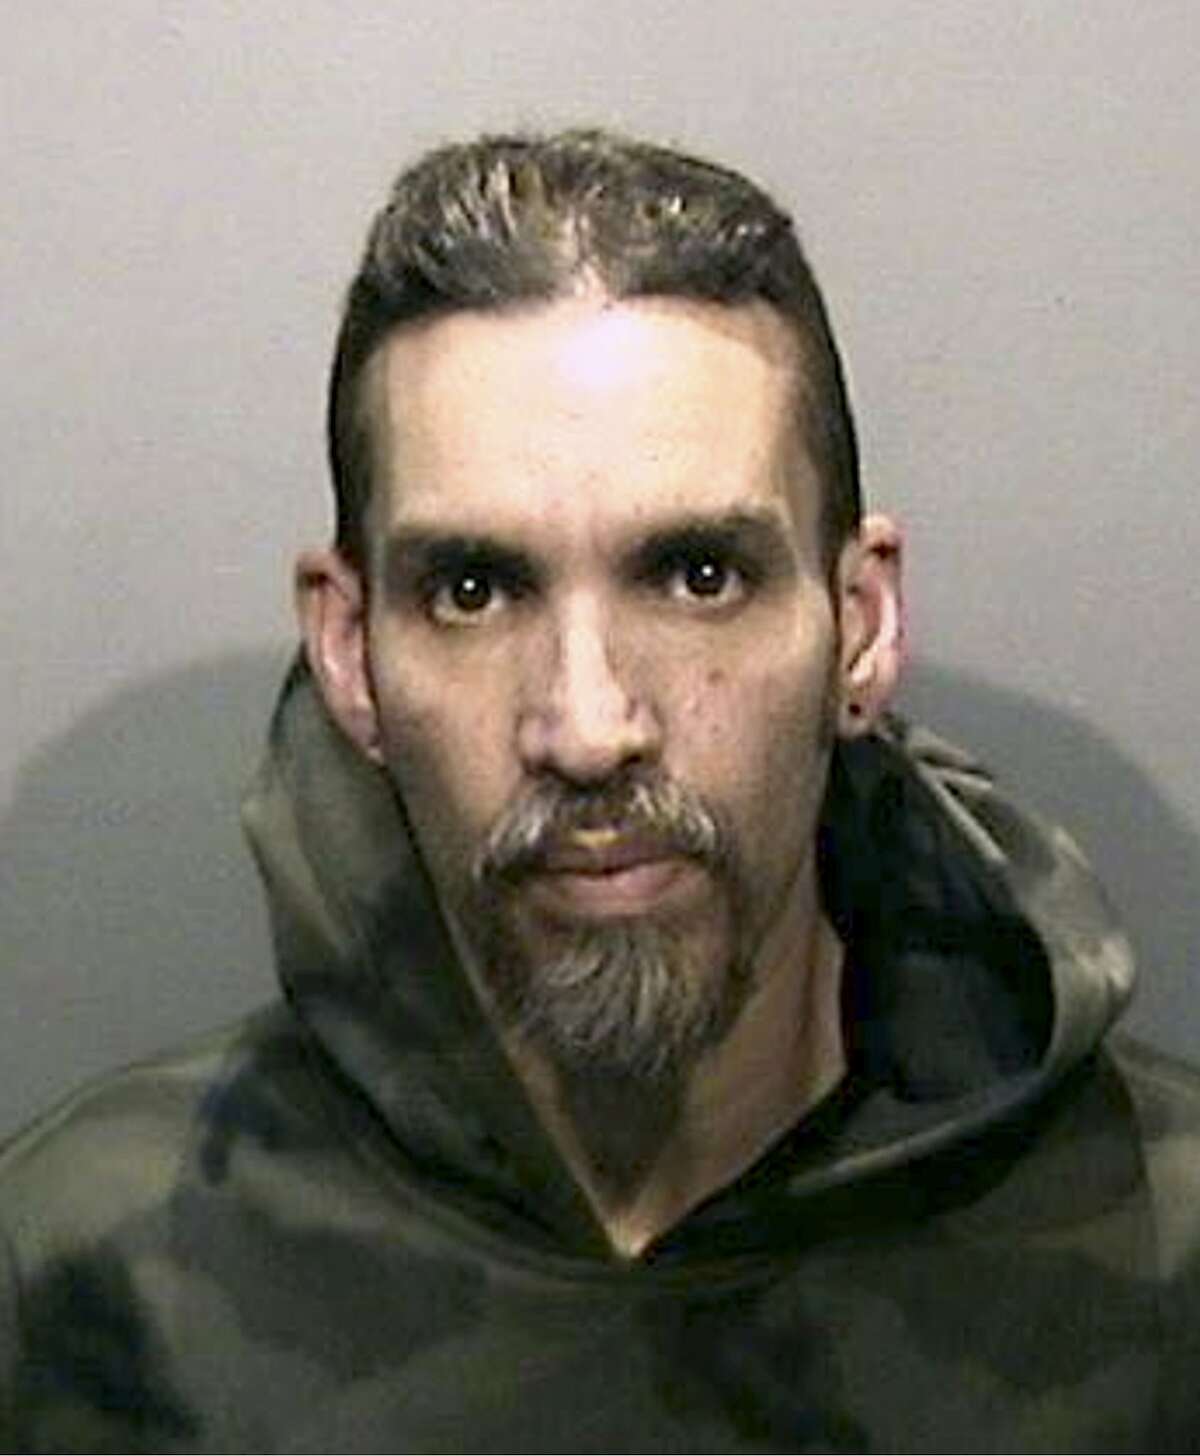 FILE - This Monday, June 5, 2017, file photo released by the Alameda County Sheriff's Office shows Derick Almena at Santa Rita Jail in Alameda County, Calif. Two men who pleaded no contest to 36 charges of involuntary manslaughter will face the family members of those who died in a fire at an illegally converted Northern California warehouse. A two-day sentencing hearing for Almena and Max Harris is scheduled to begin Thursday, Aug. 9, 2018 in Oakland, Calif. (Alameda County Sheriff's Office via AP, File)